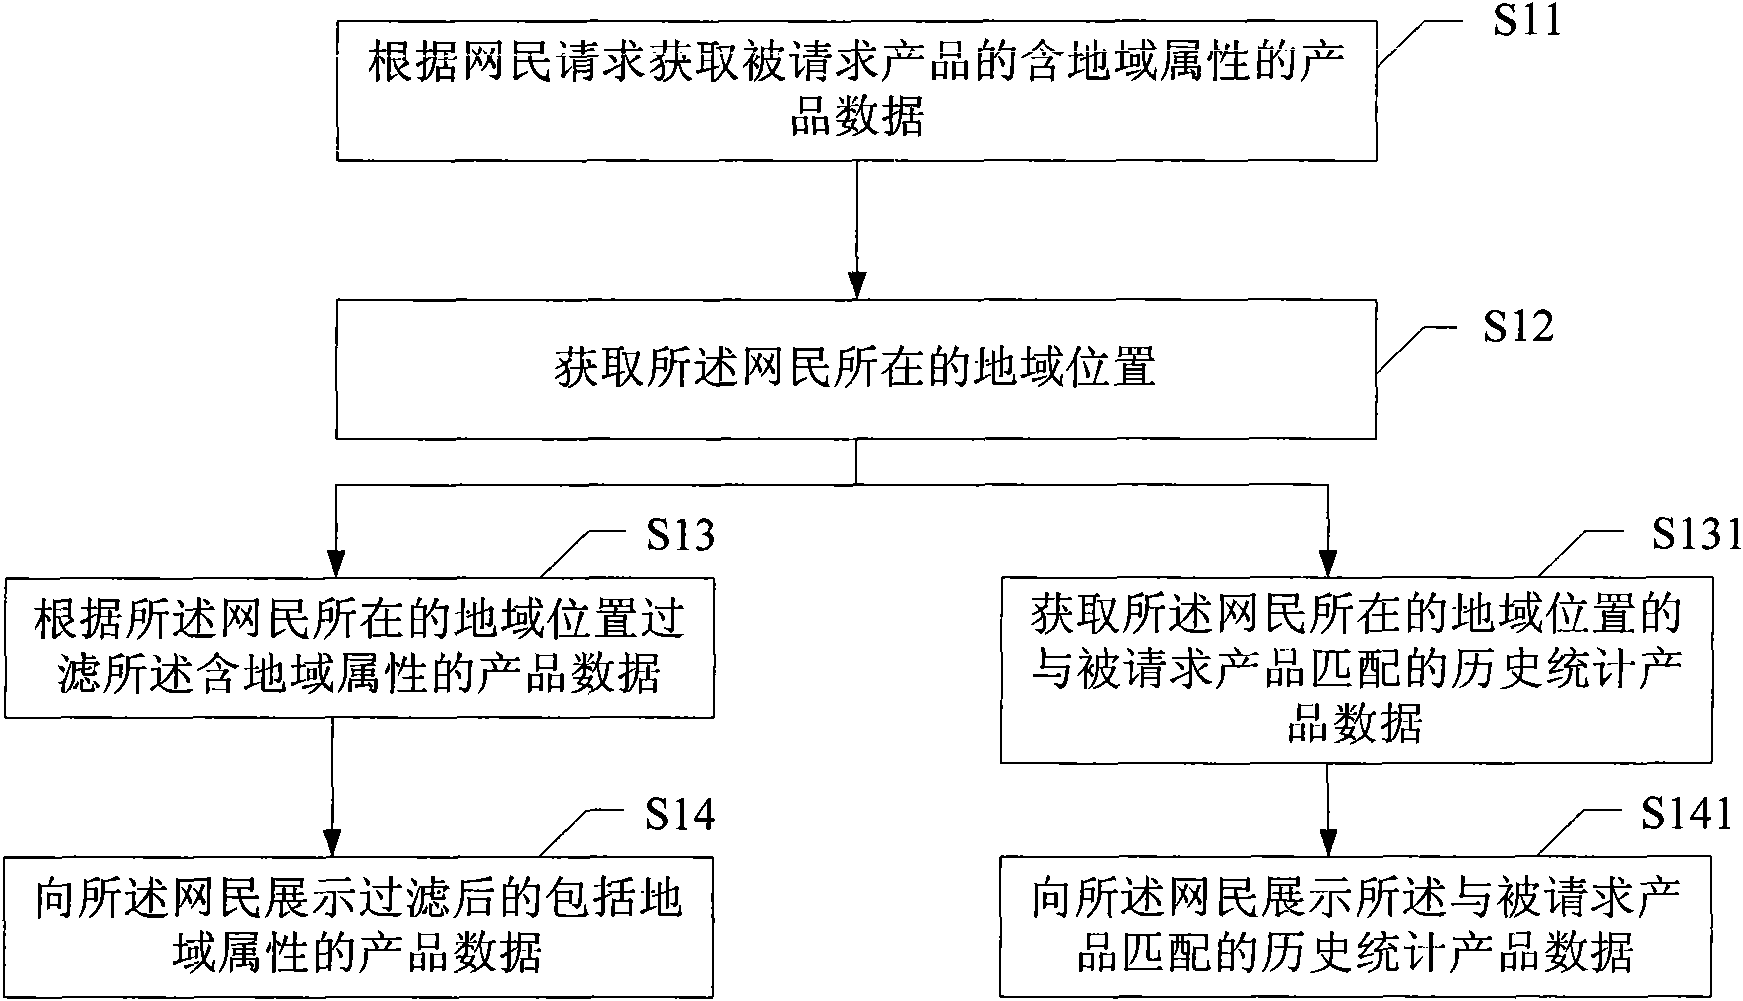 Method and system for showing production data based on net citizen region location